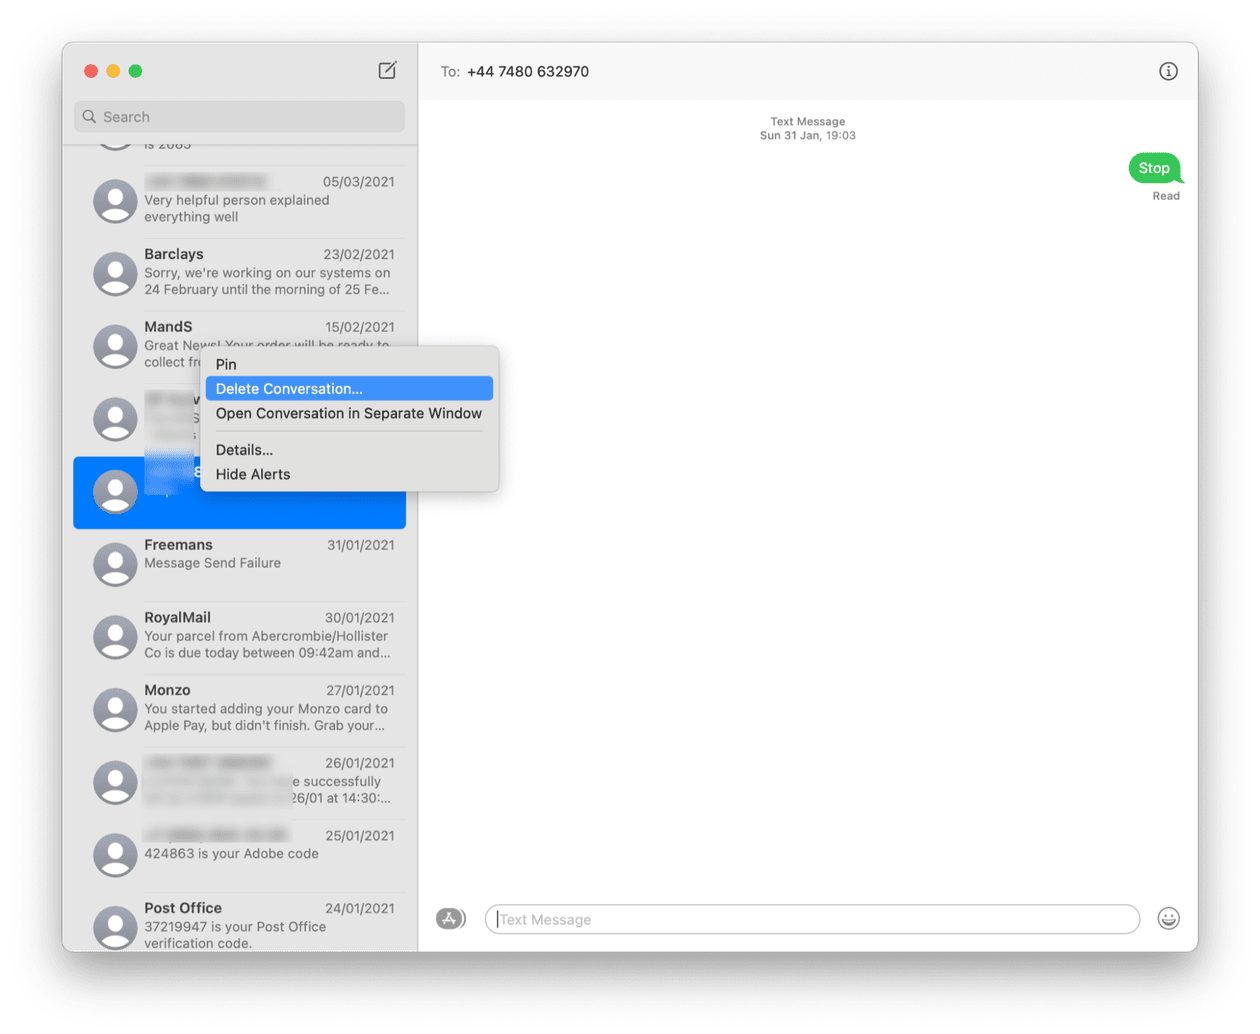 imessage for mac os x